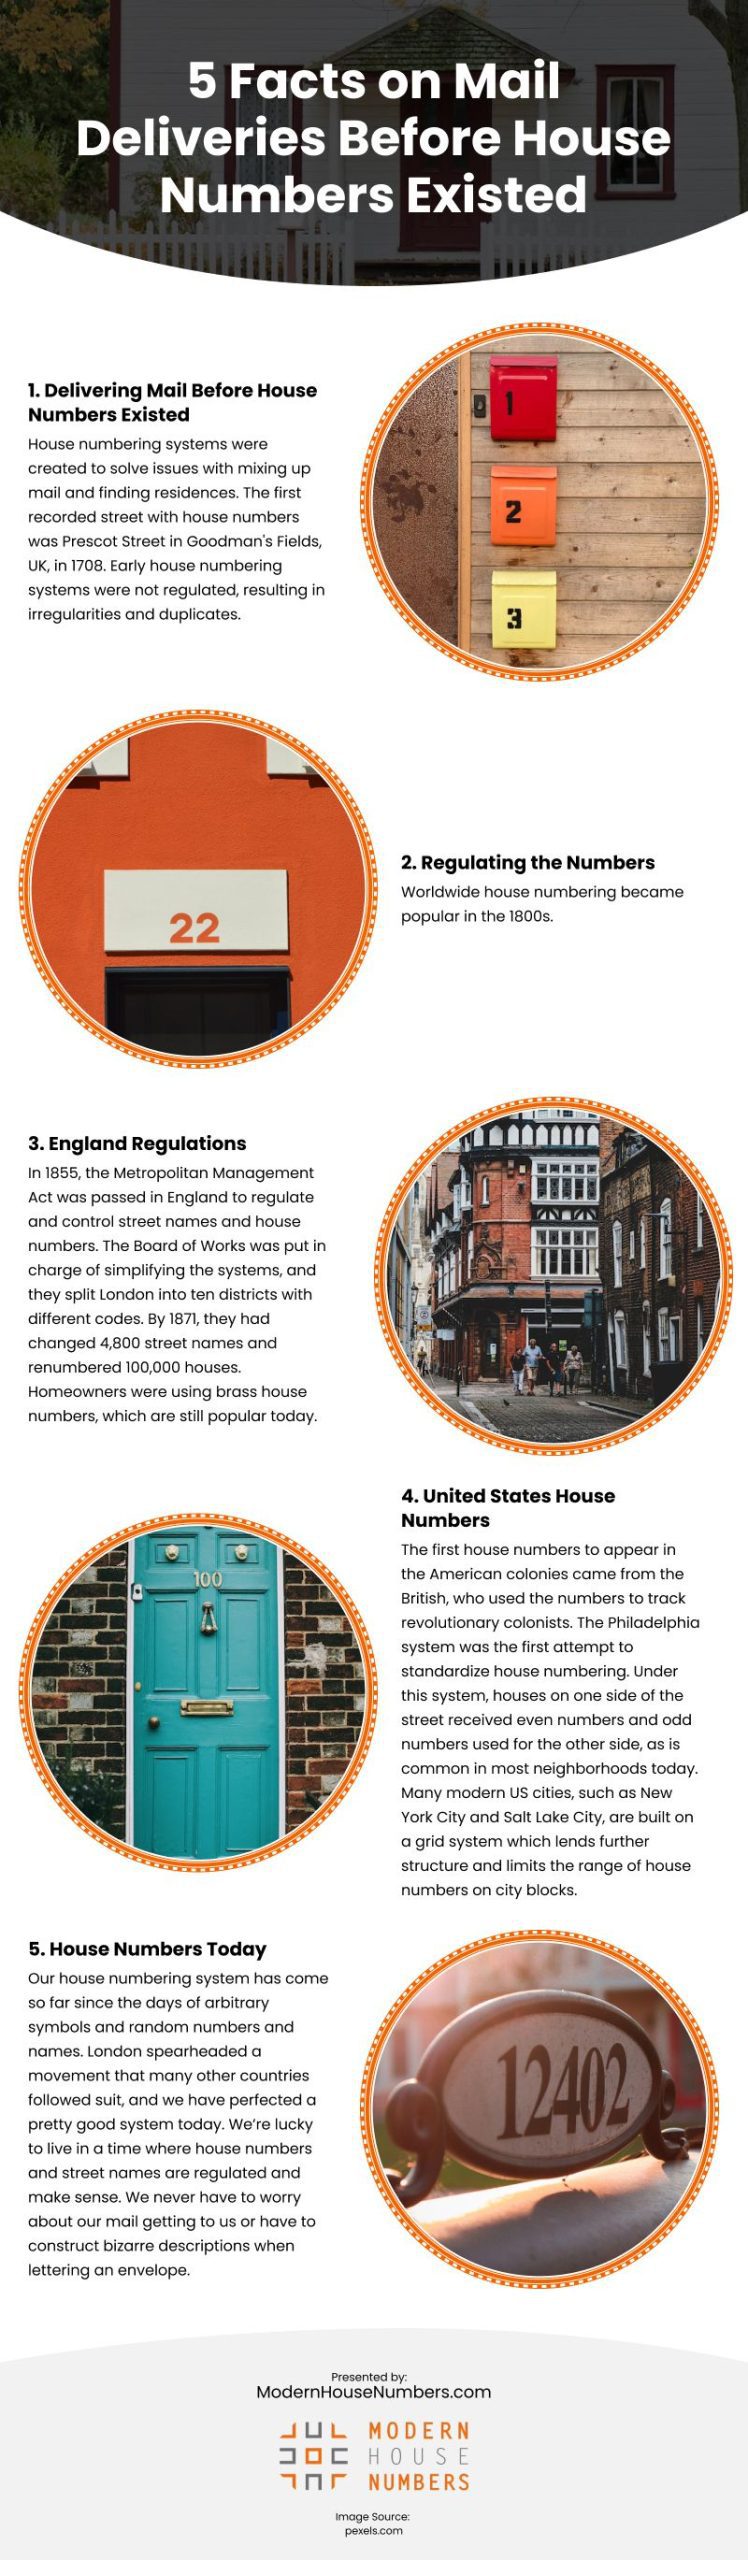 5 Facts on Mail Deliveries Before House Numbers Existed Infographic